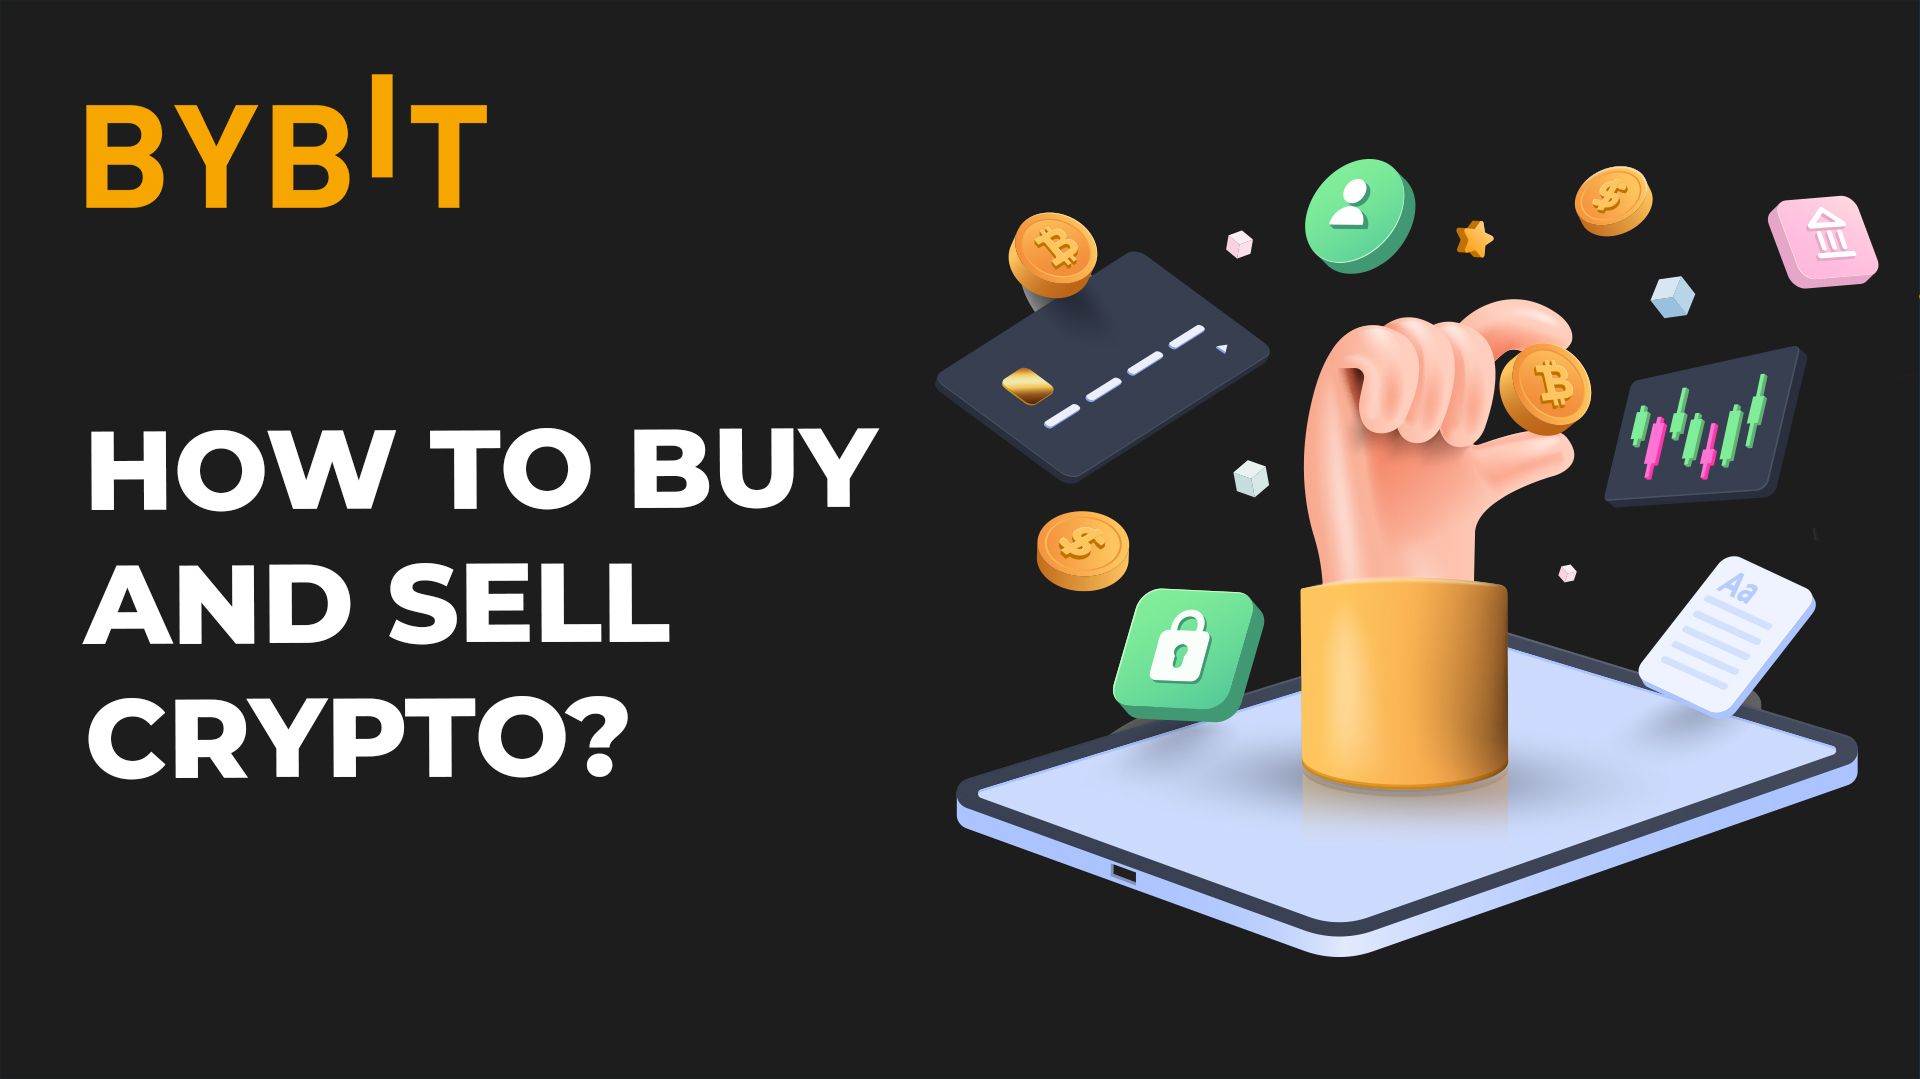 Bybit. What is P2P trading? How to buy crypto?